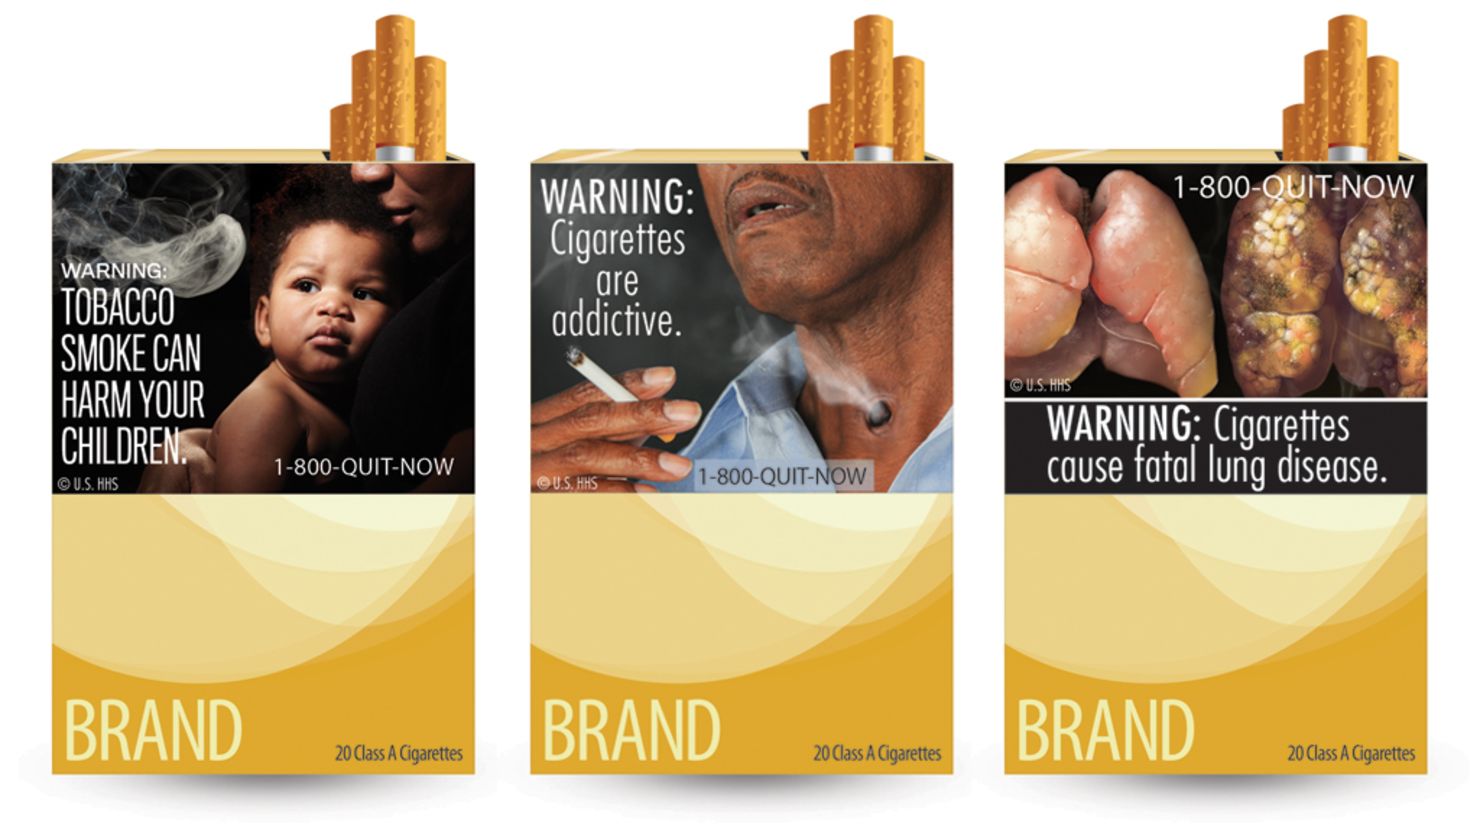 At least 43 other countries require cigarette box warnings like these proposed by the FDA.